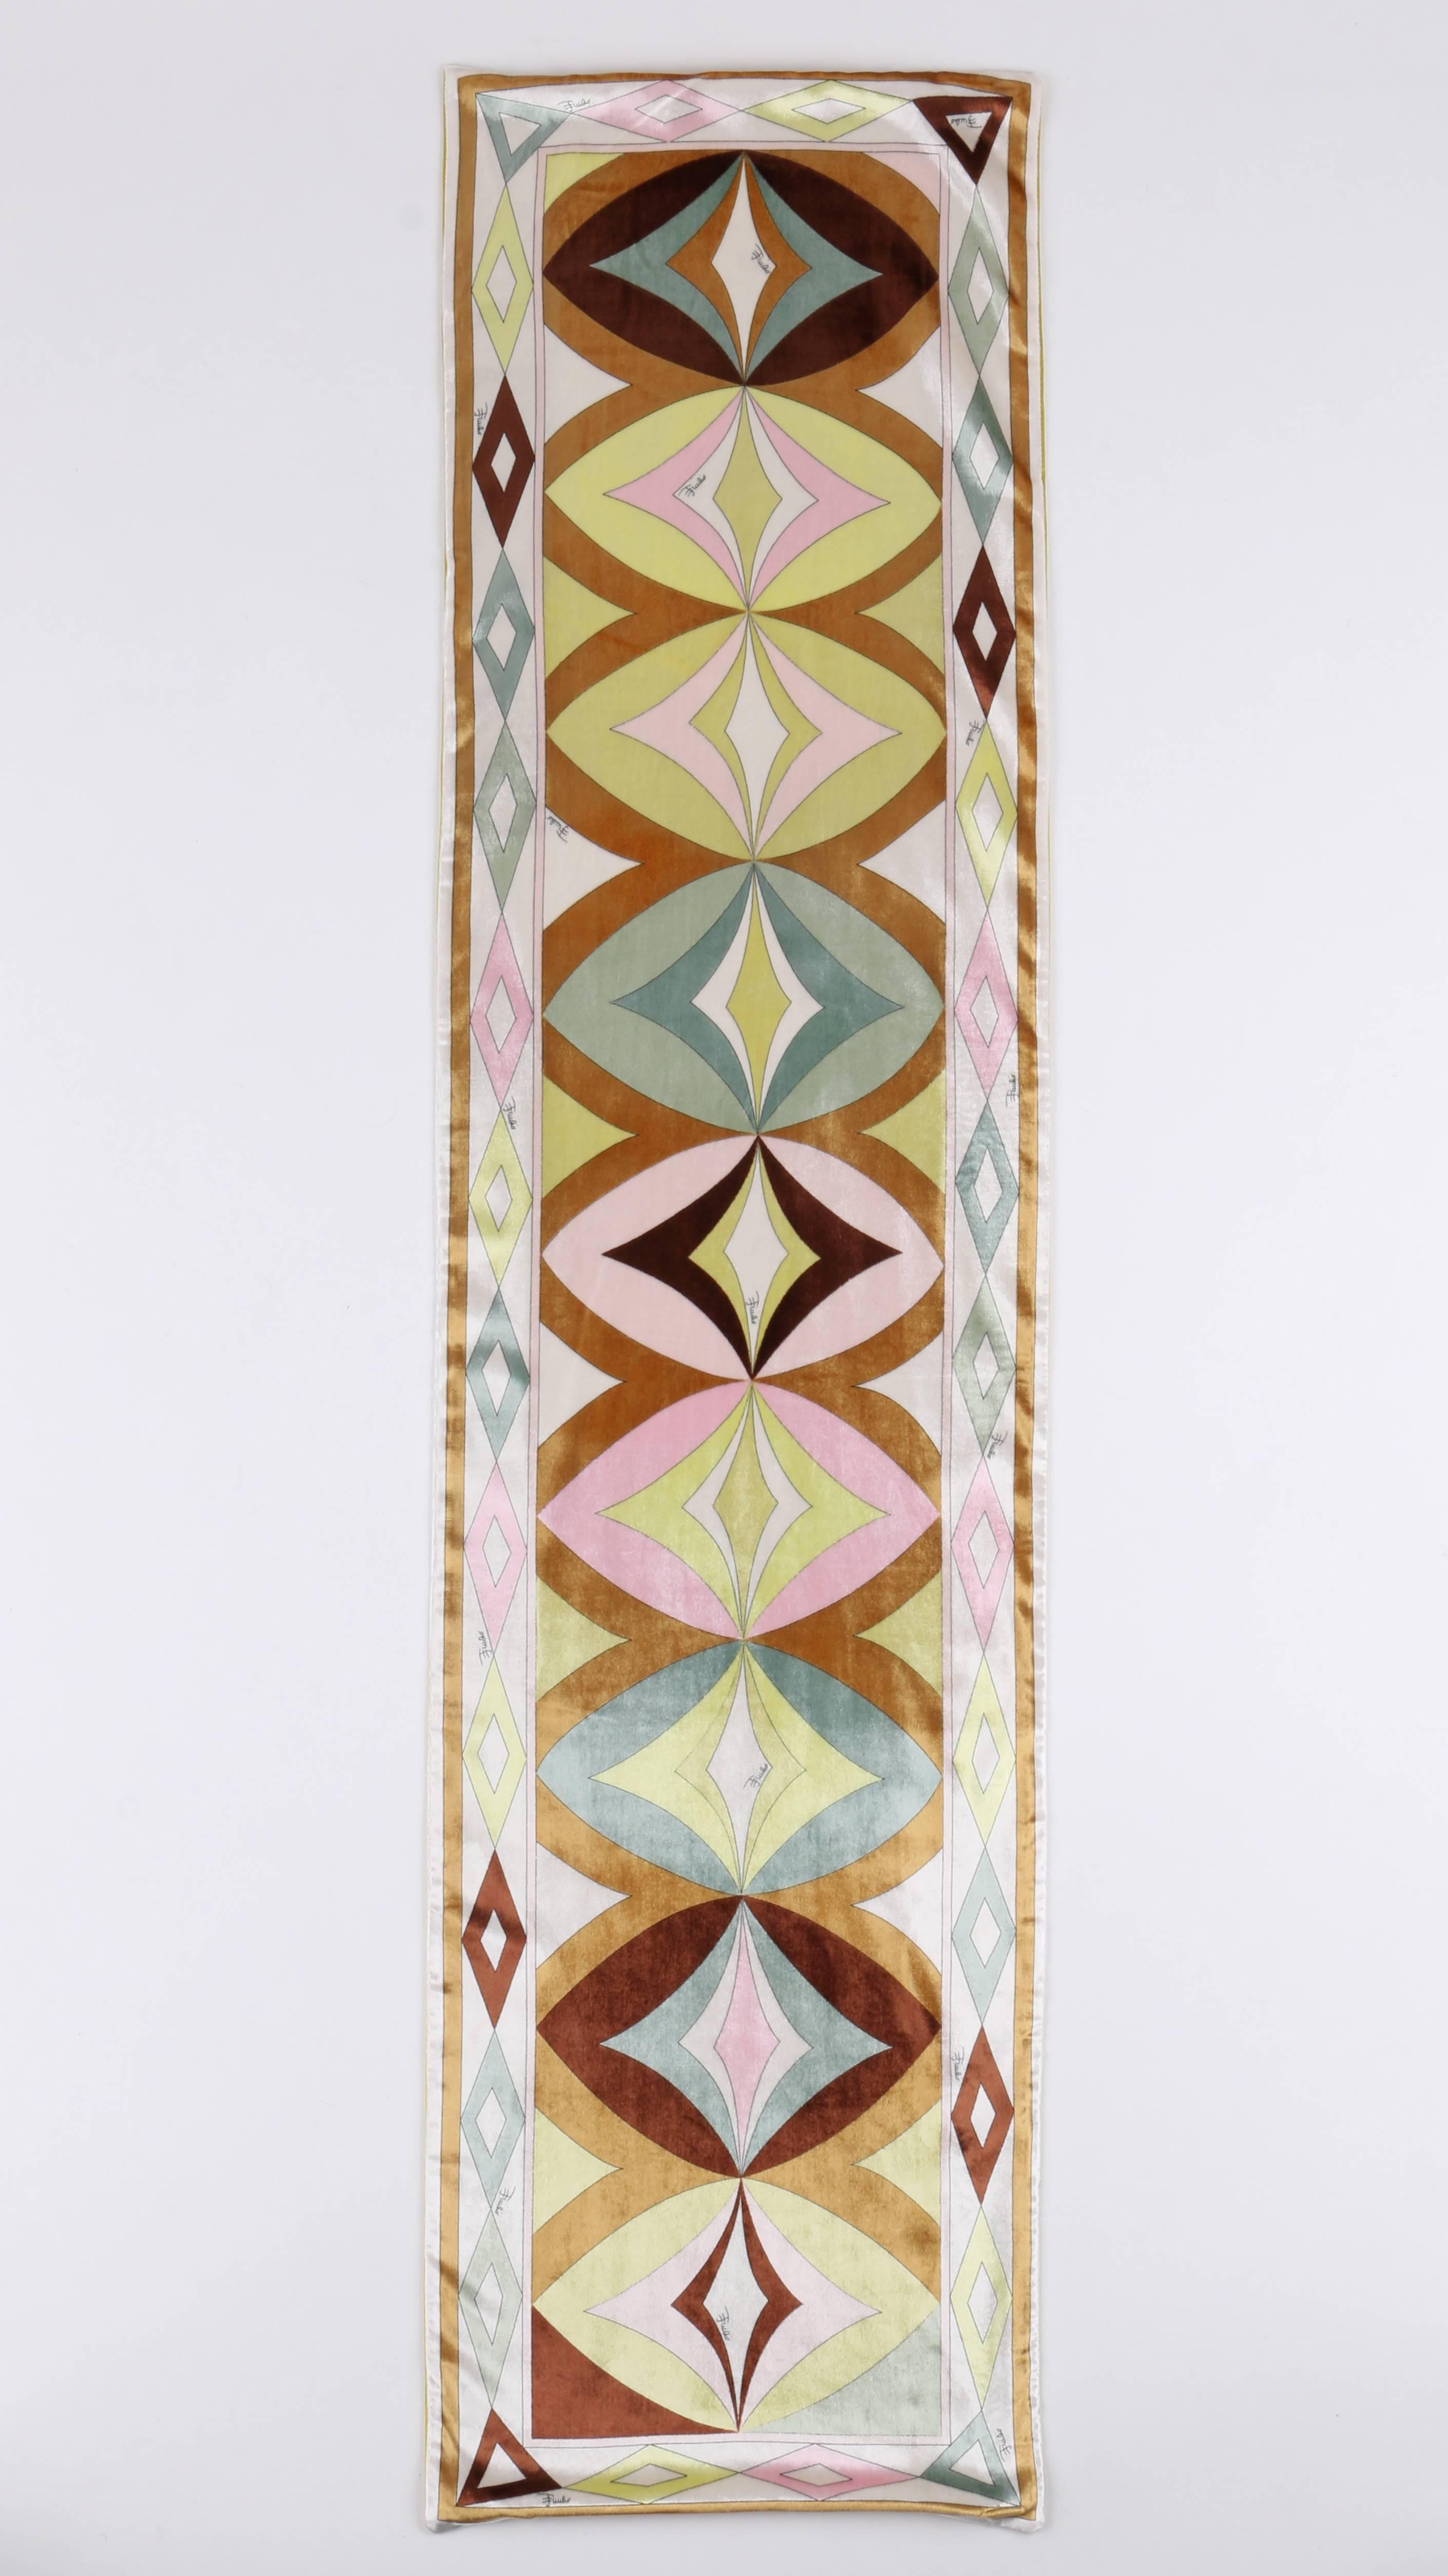 Emilio Pucci A/W 2004 (designed by Christian Lacroix) silk velvet oblong scarf. Geometric op art signature print in shades of ivory, pink, yellow, brown, and green. Yellow satin back. Long oblong shape. Unmarked Fabric Content: Viscose/Cupro blend.